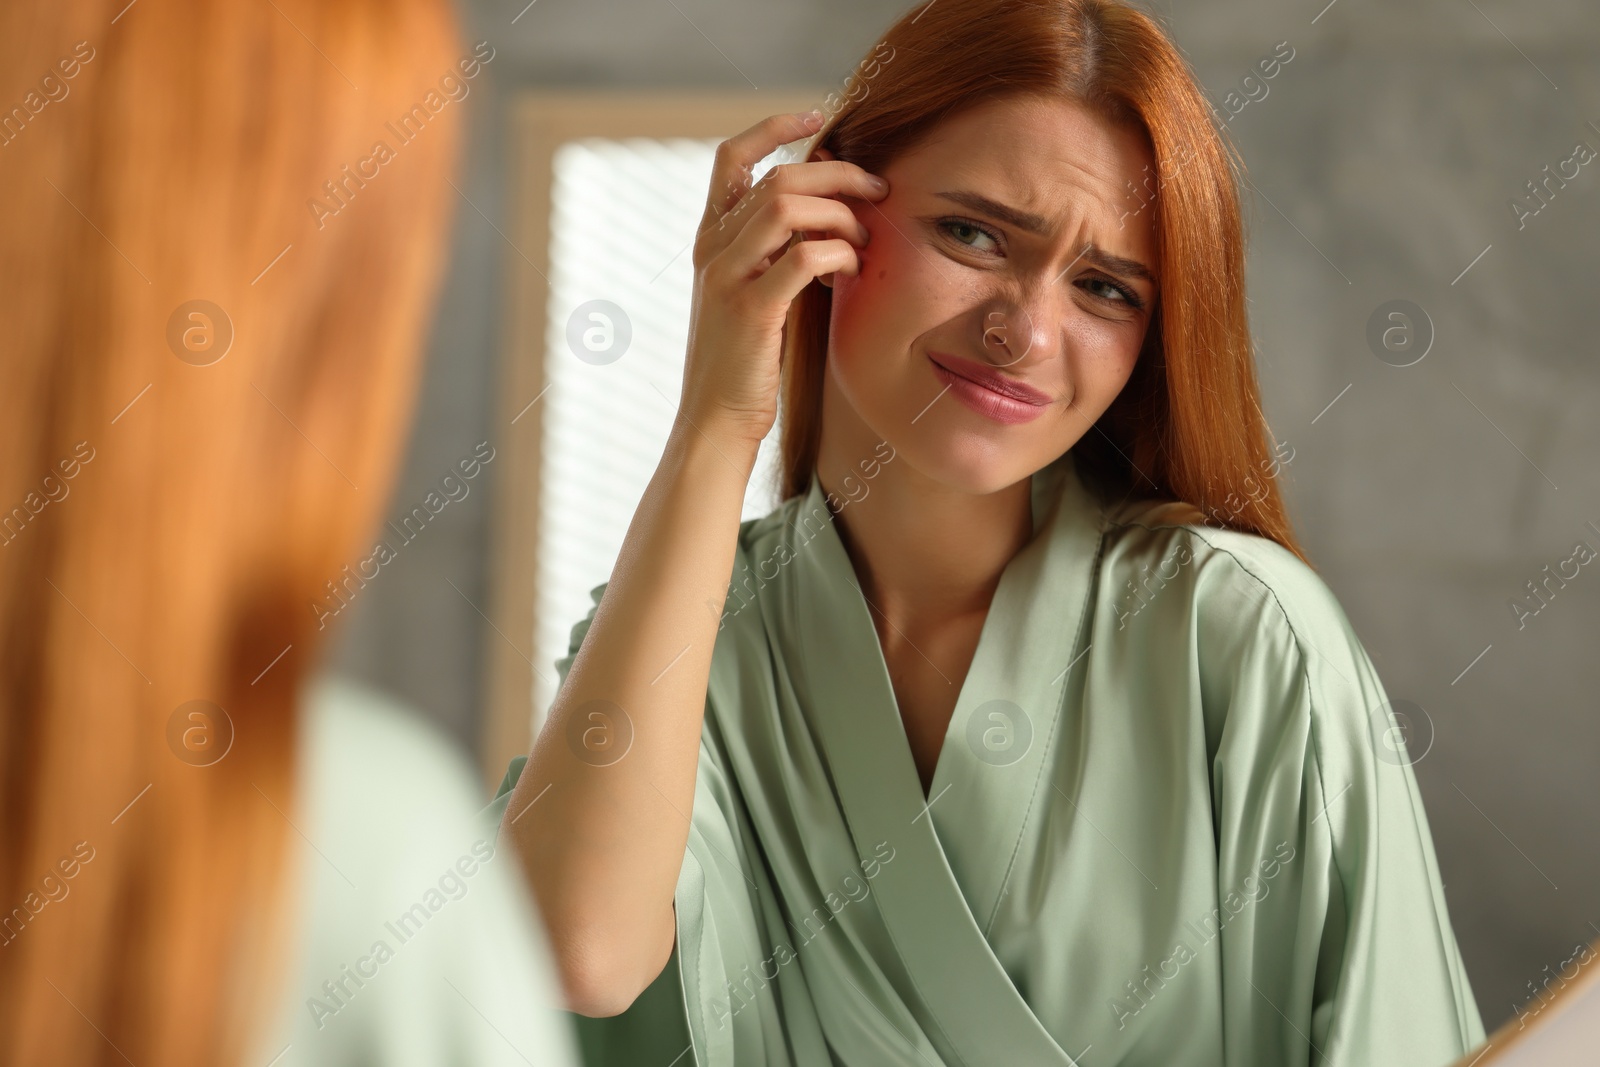 Photo of Suffering from allergy. Young woman checking her face near mirror in bathroom